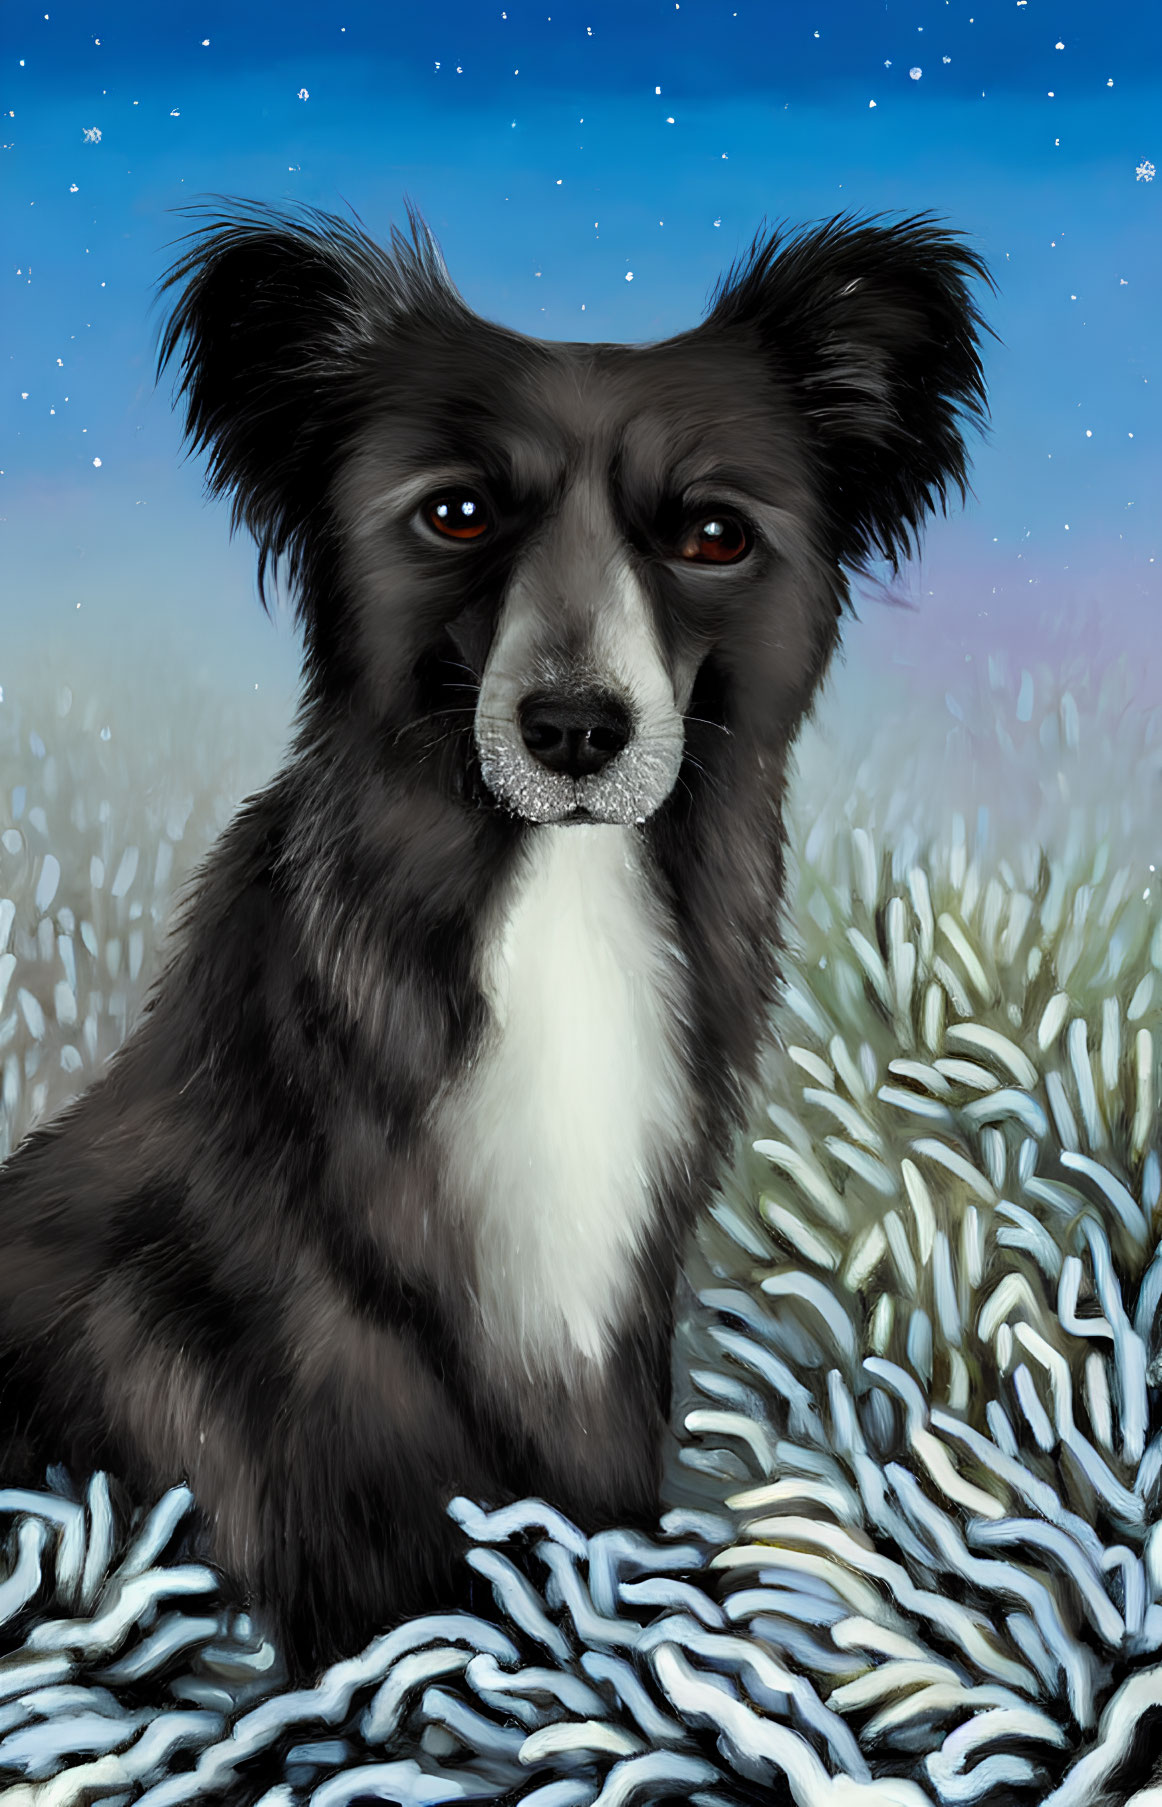 Black and White Dog in Field of White Flowers Under Starry Night Sky